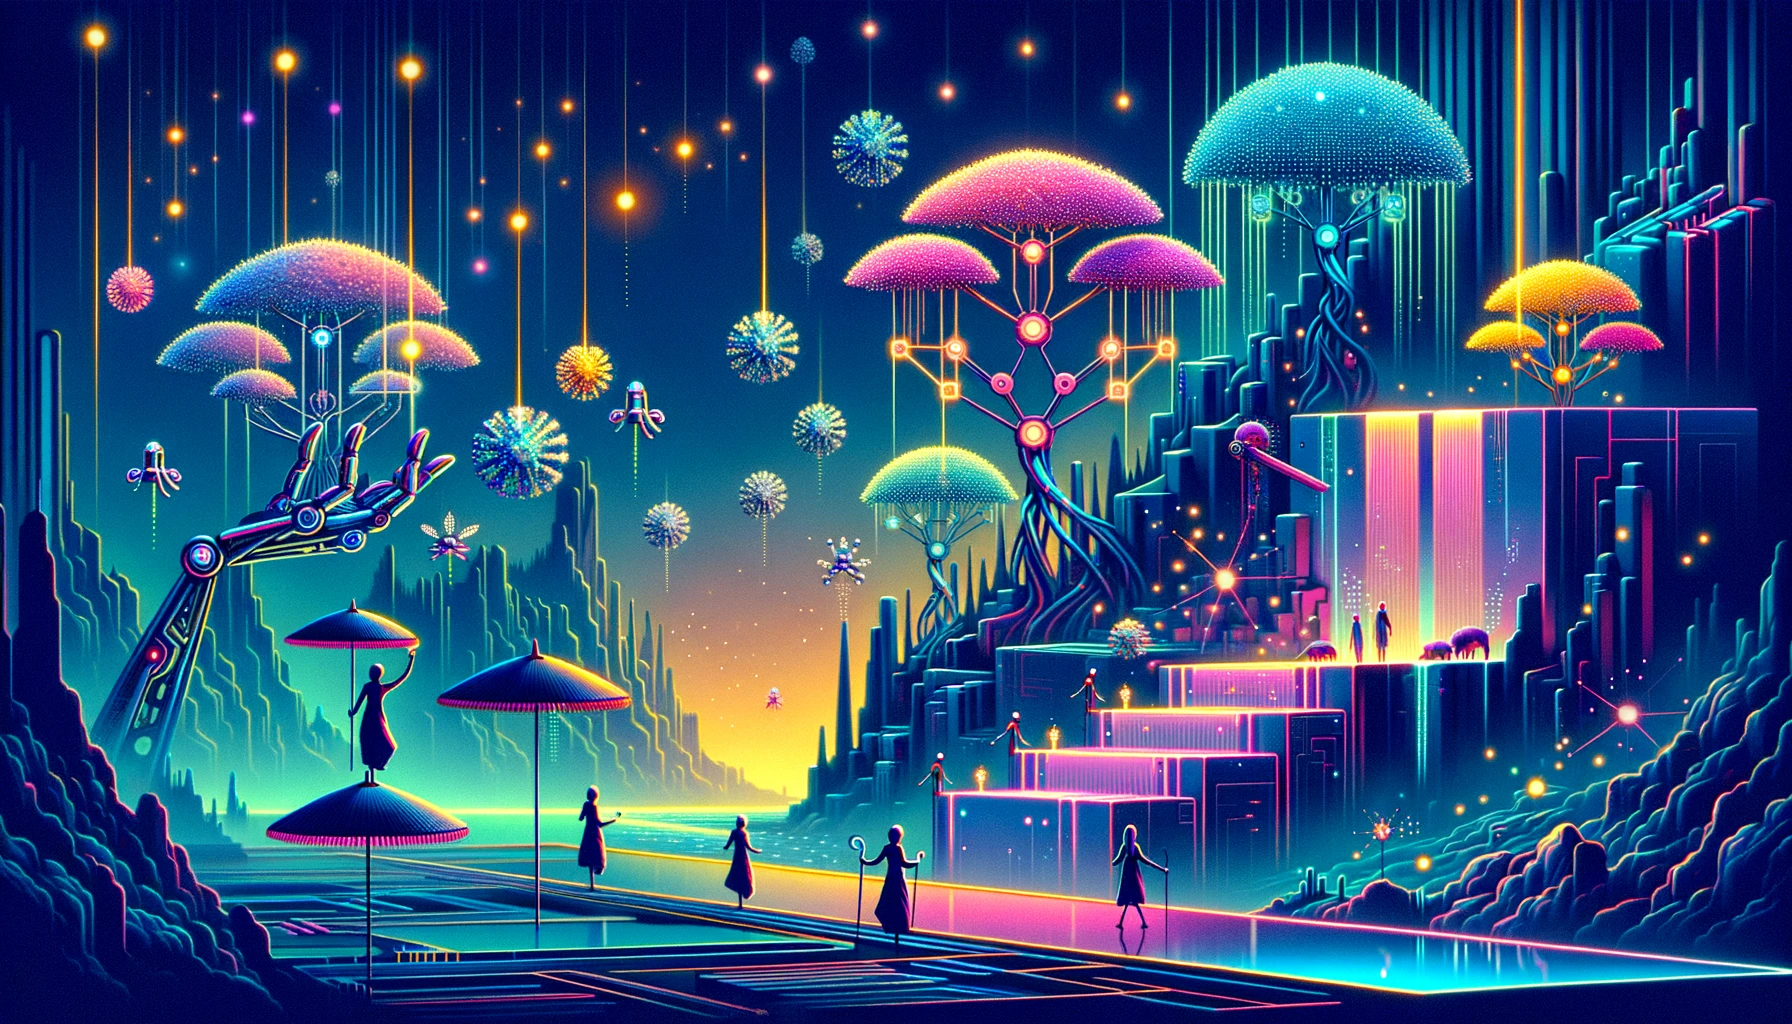 Illustration of metaverse landscape with surrealistic and neon cyber aesthetics, nanobots creating nature replicas, and figures with umbrellas.